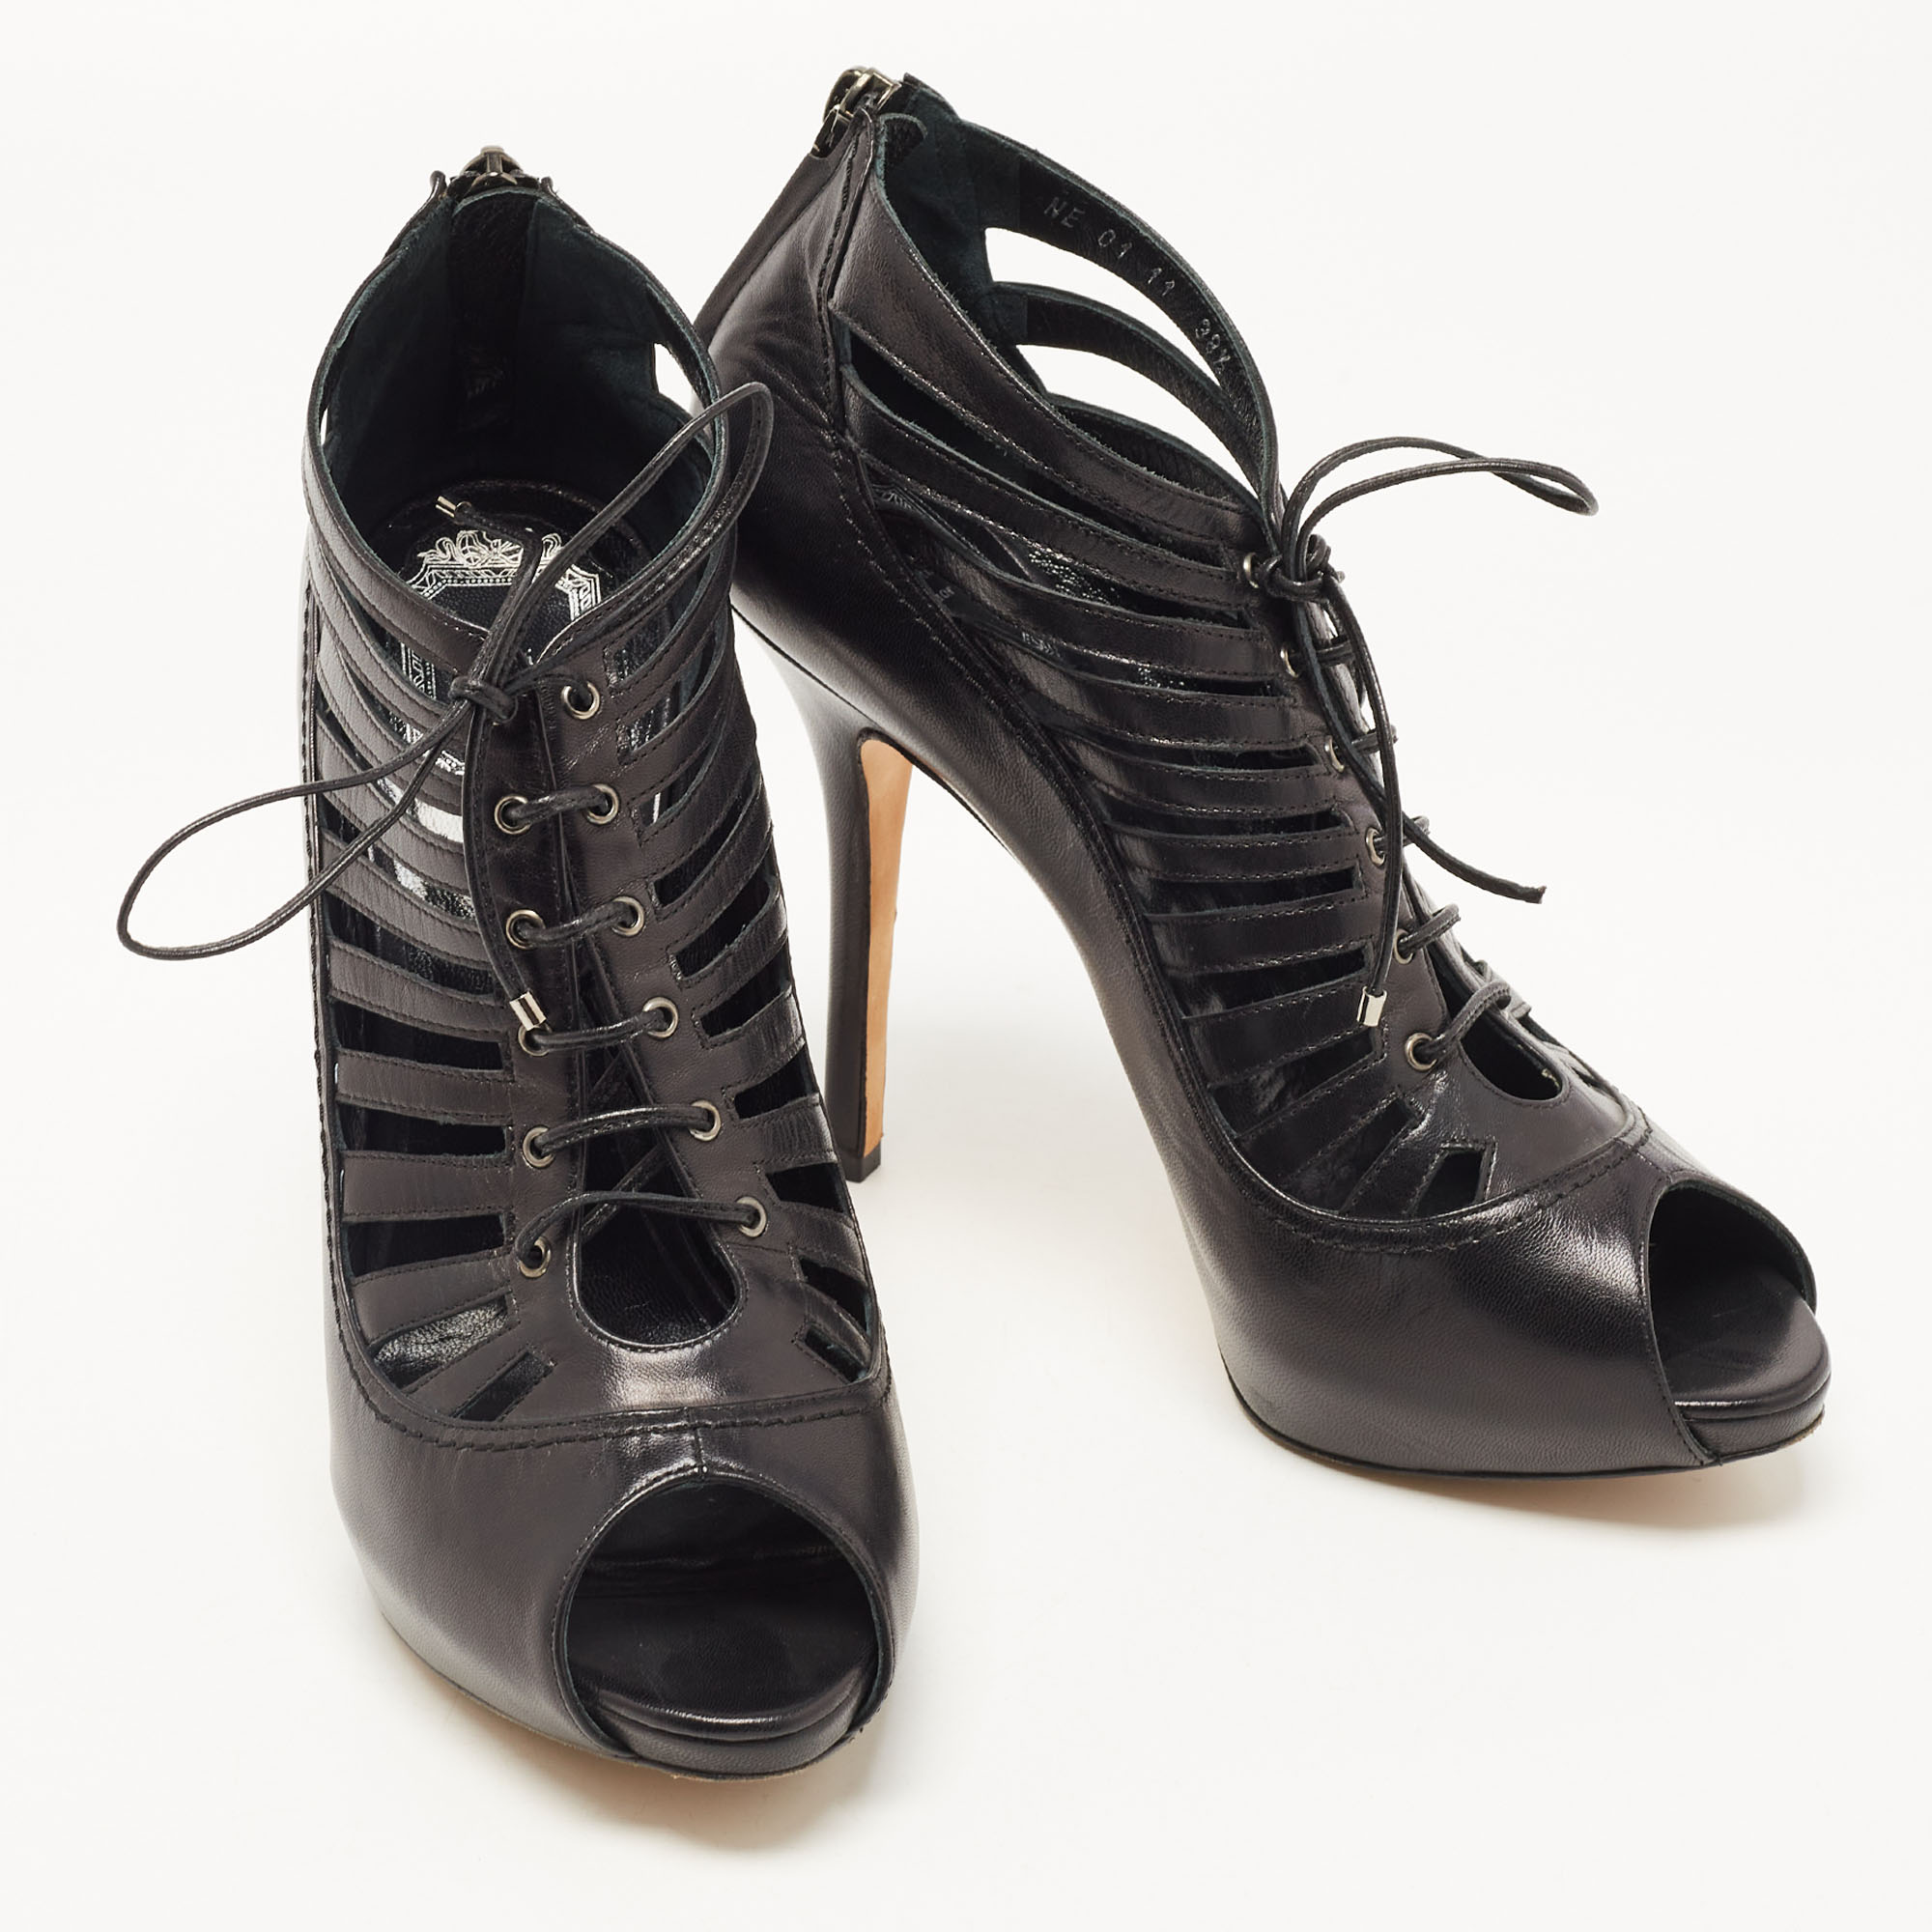 Dior Black Leather Gladiator Ankle Boots Size 38.5